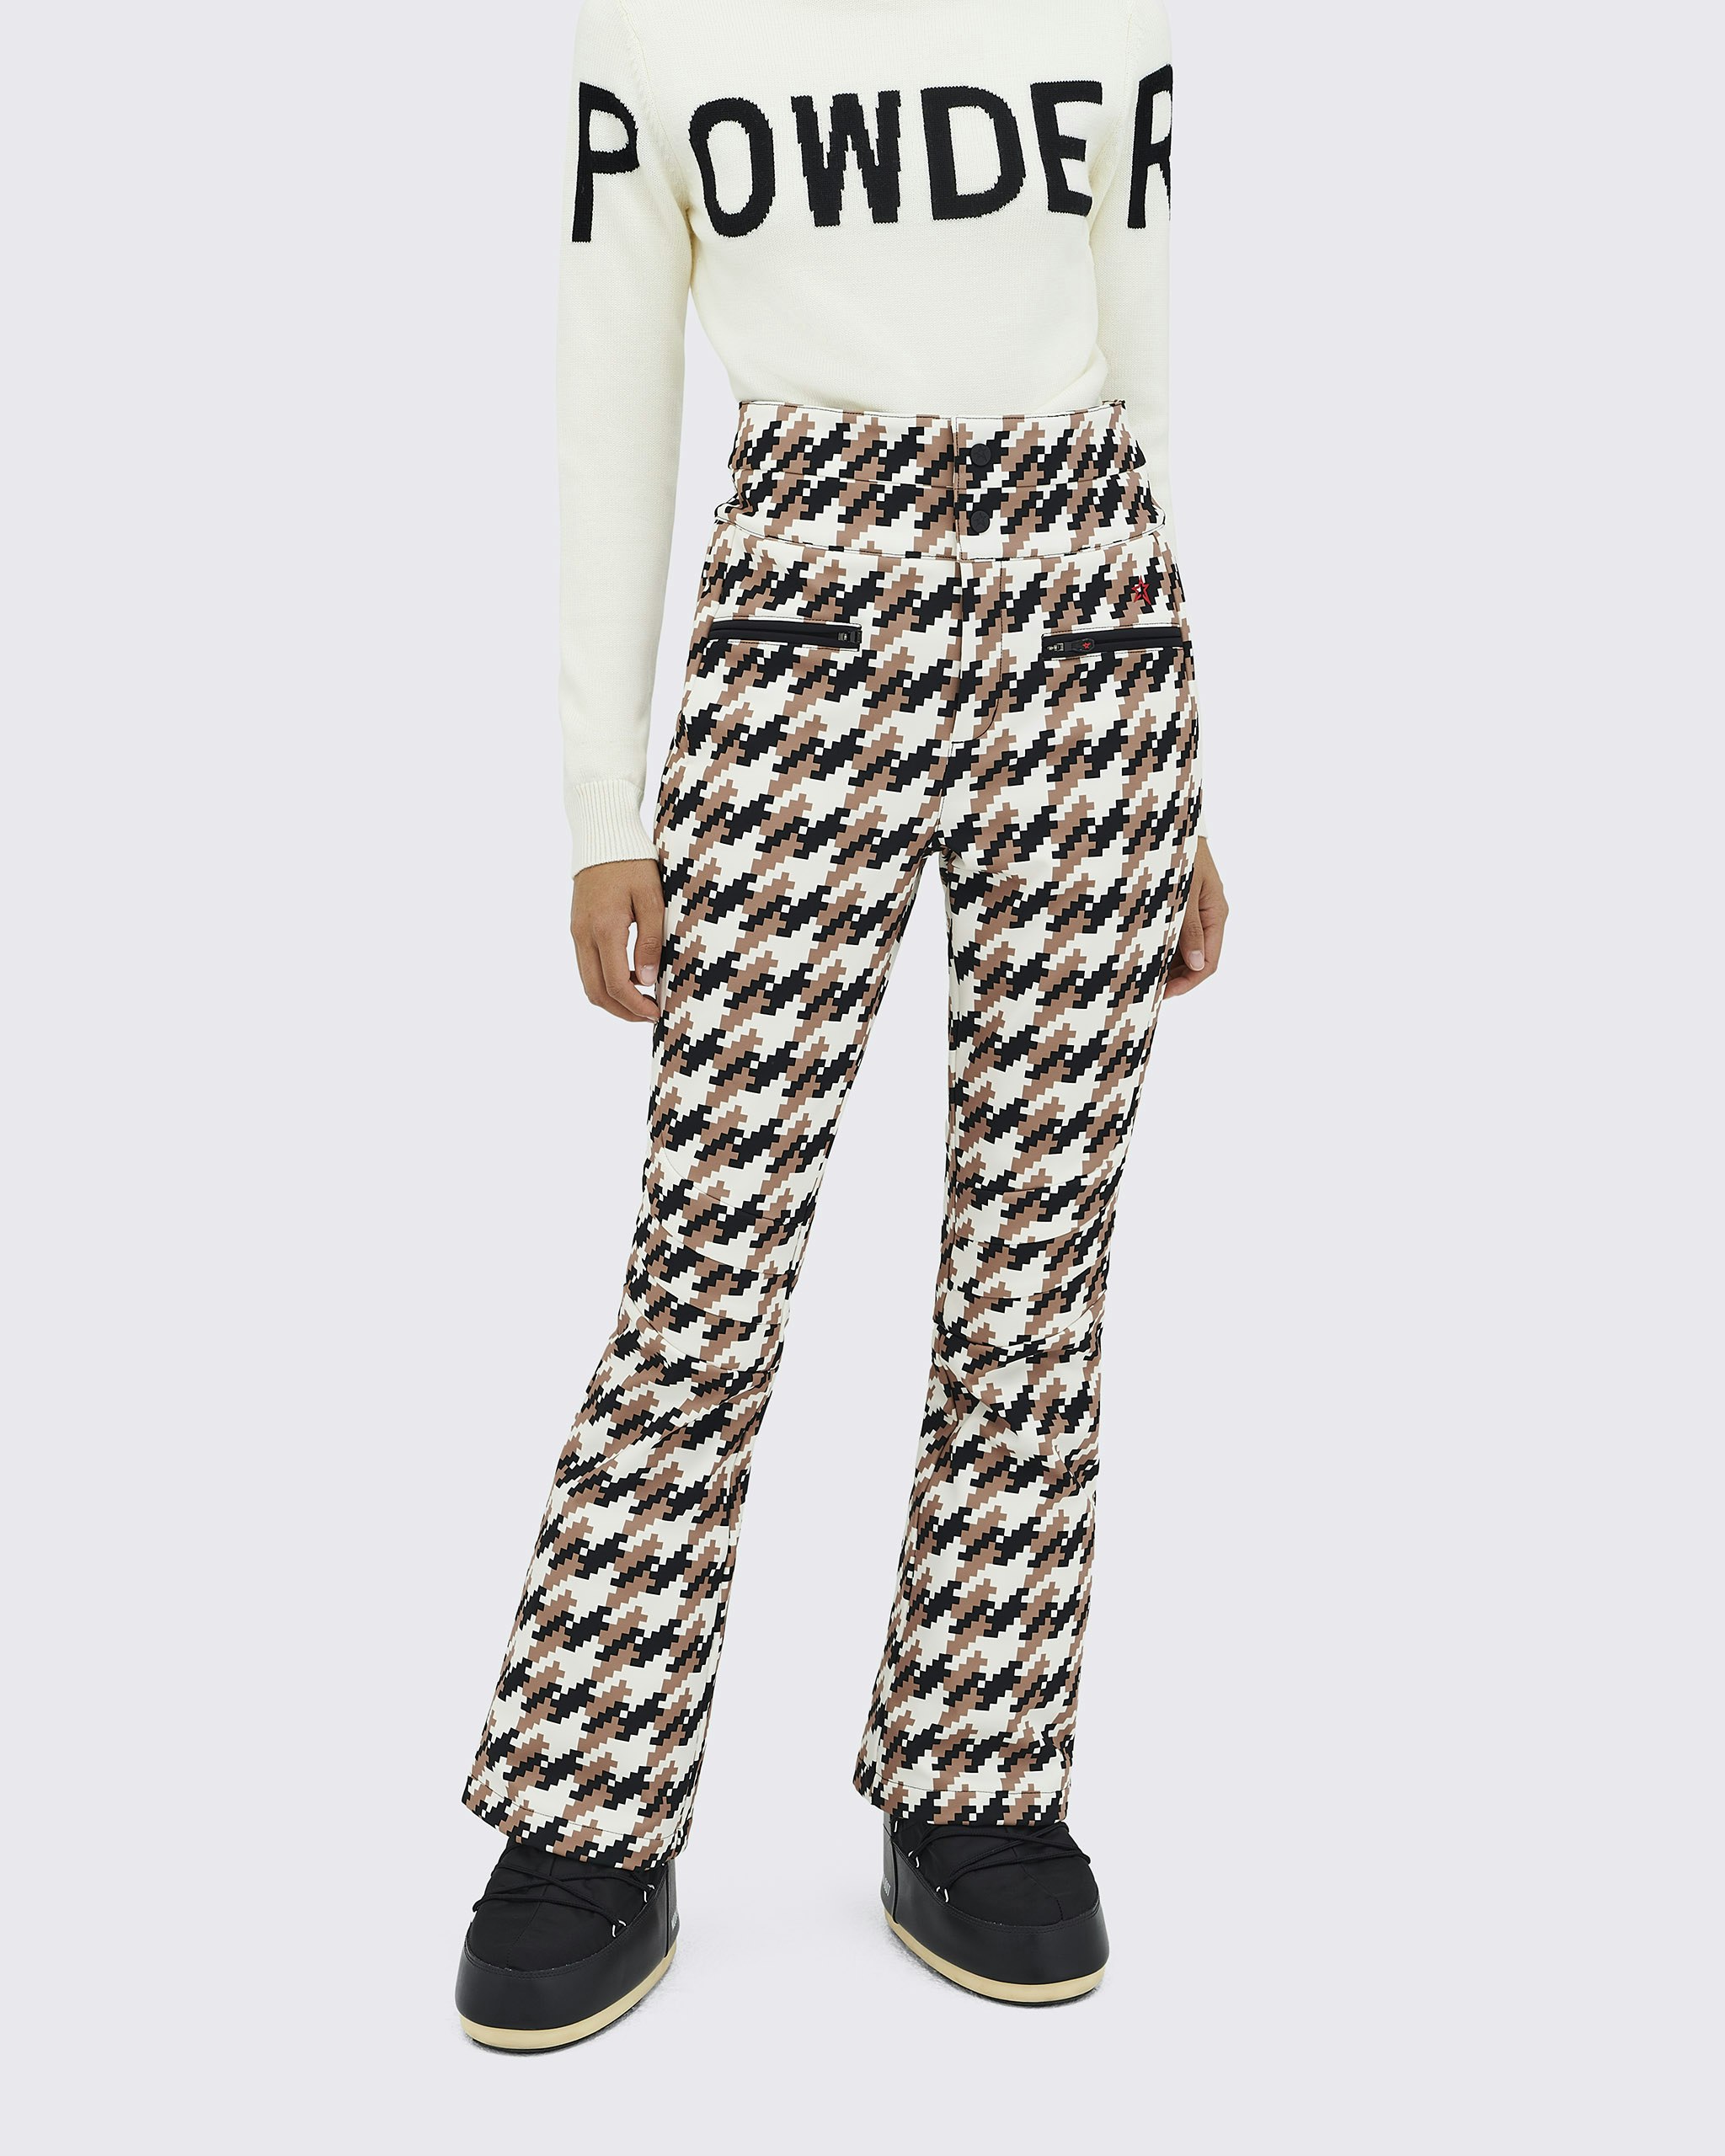 Thermal houndstooth knitted leggings